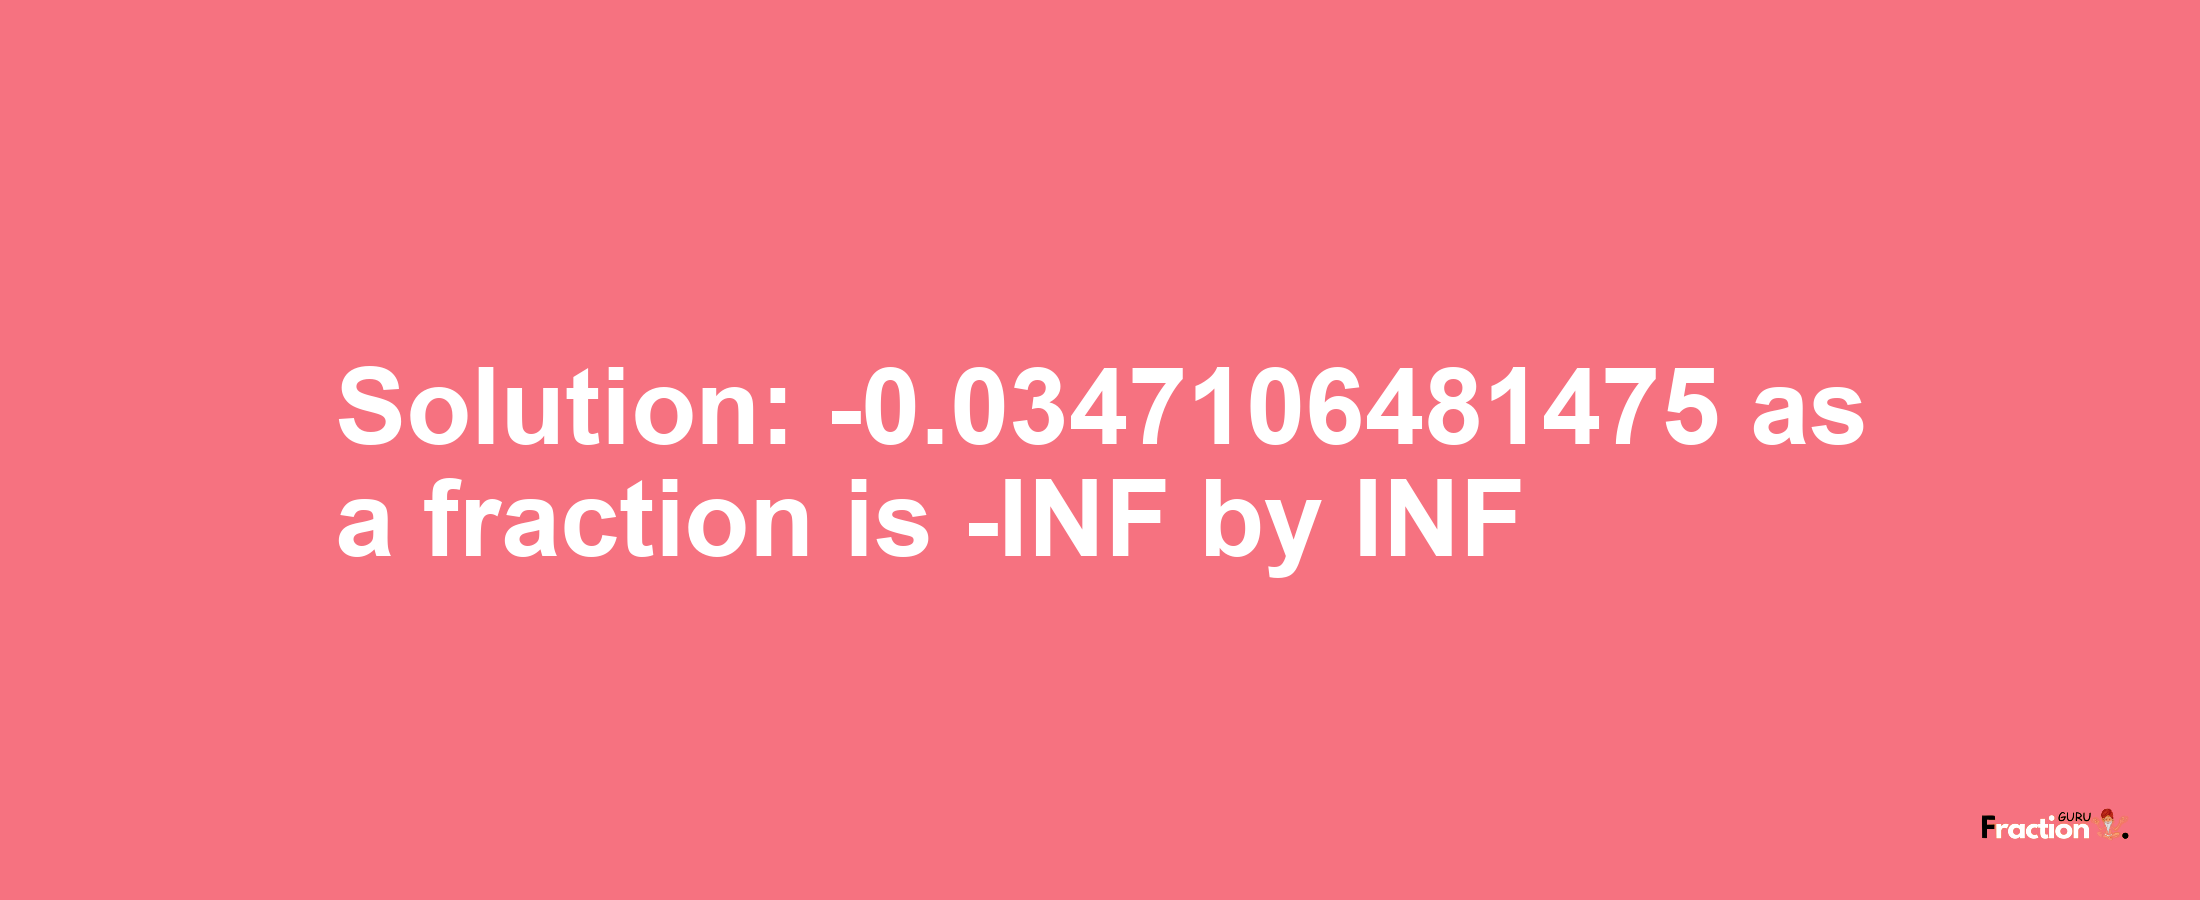 Solution:-0.0347106481475 as a fraction is -INF/INF